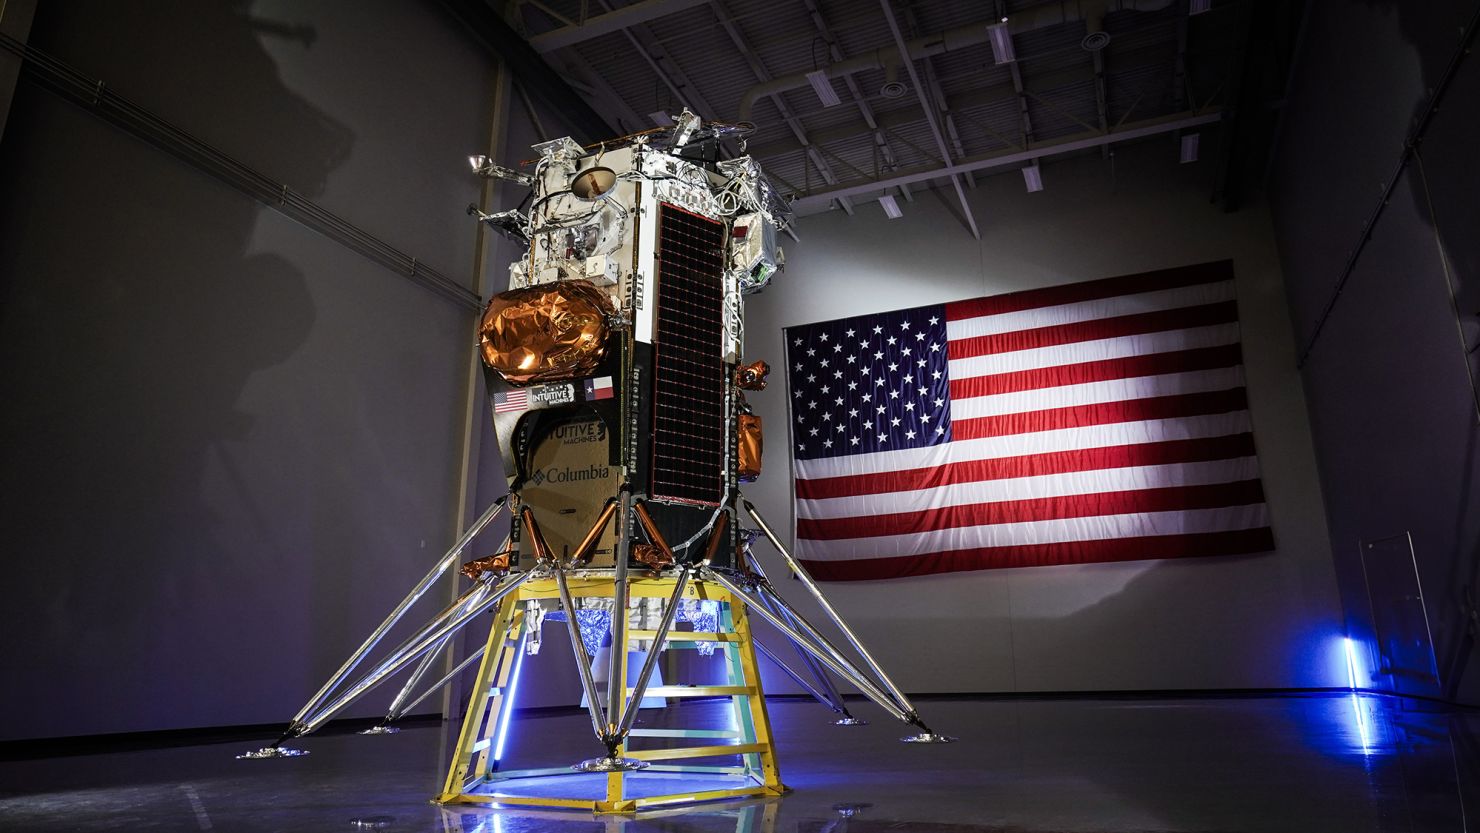 Intuitive Machines' Nova-C lunar lander will be the second vehicle launched under NASA's Commercial Lunar Payload Services program. The spacecraft will aim to carry science and technology payloads to the moon.